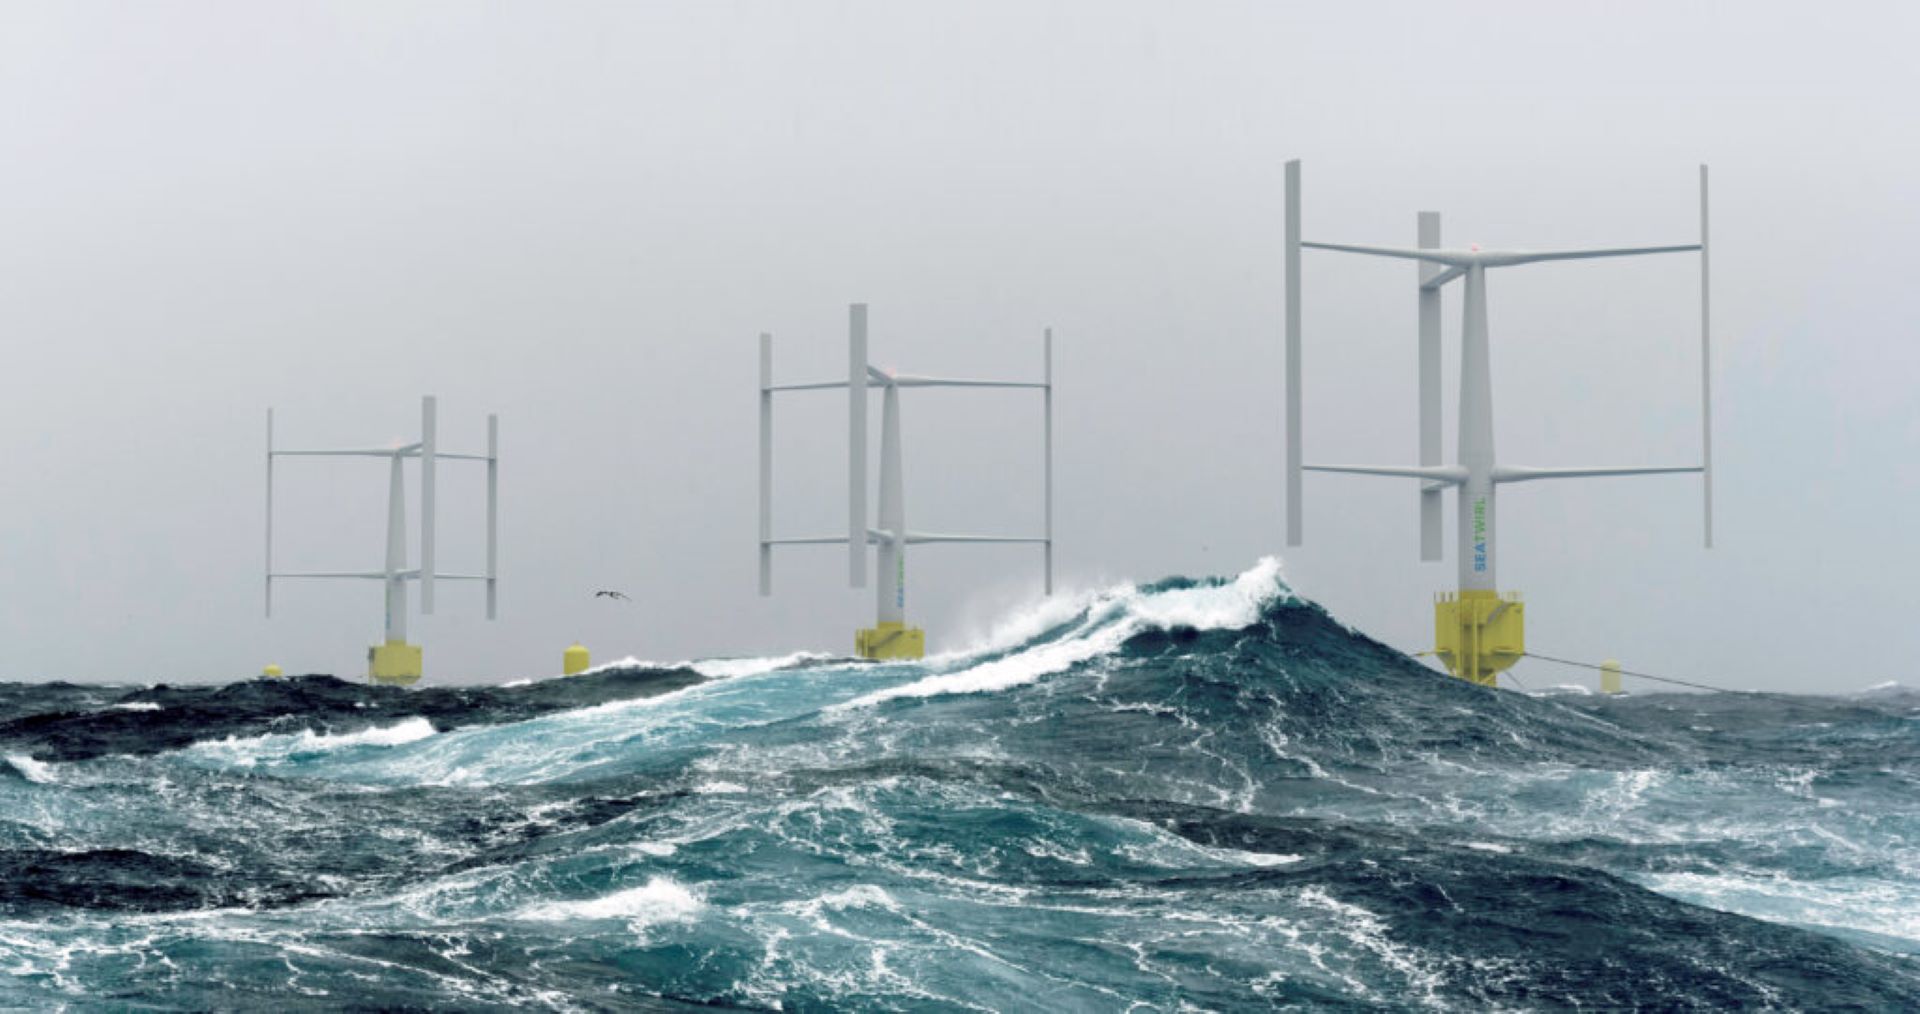 Seatwirl Designs Innovative Offshore Wind Turbines To Create Clean Energy